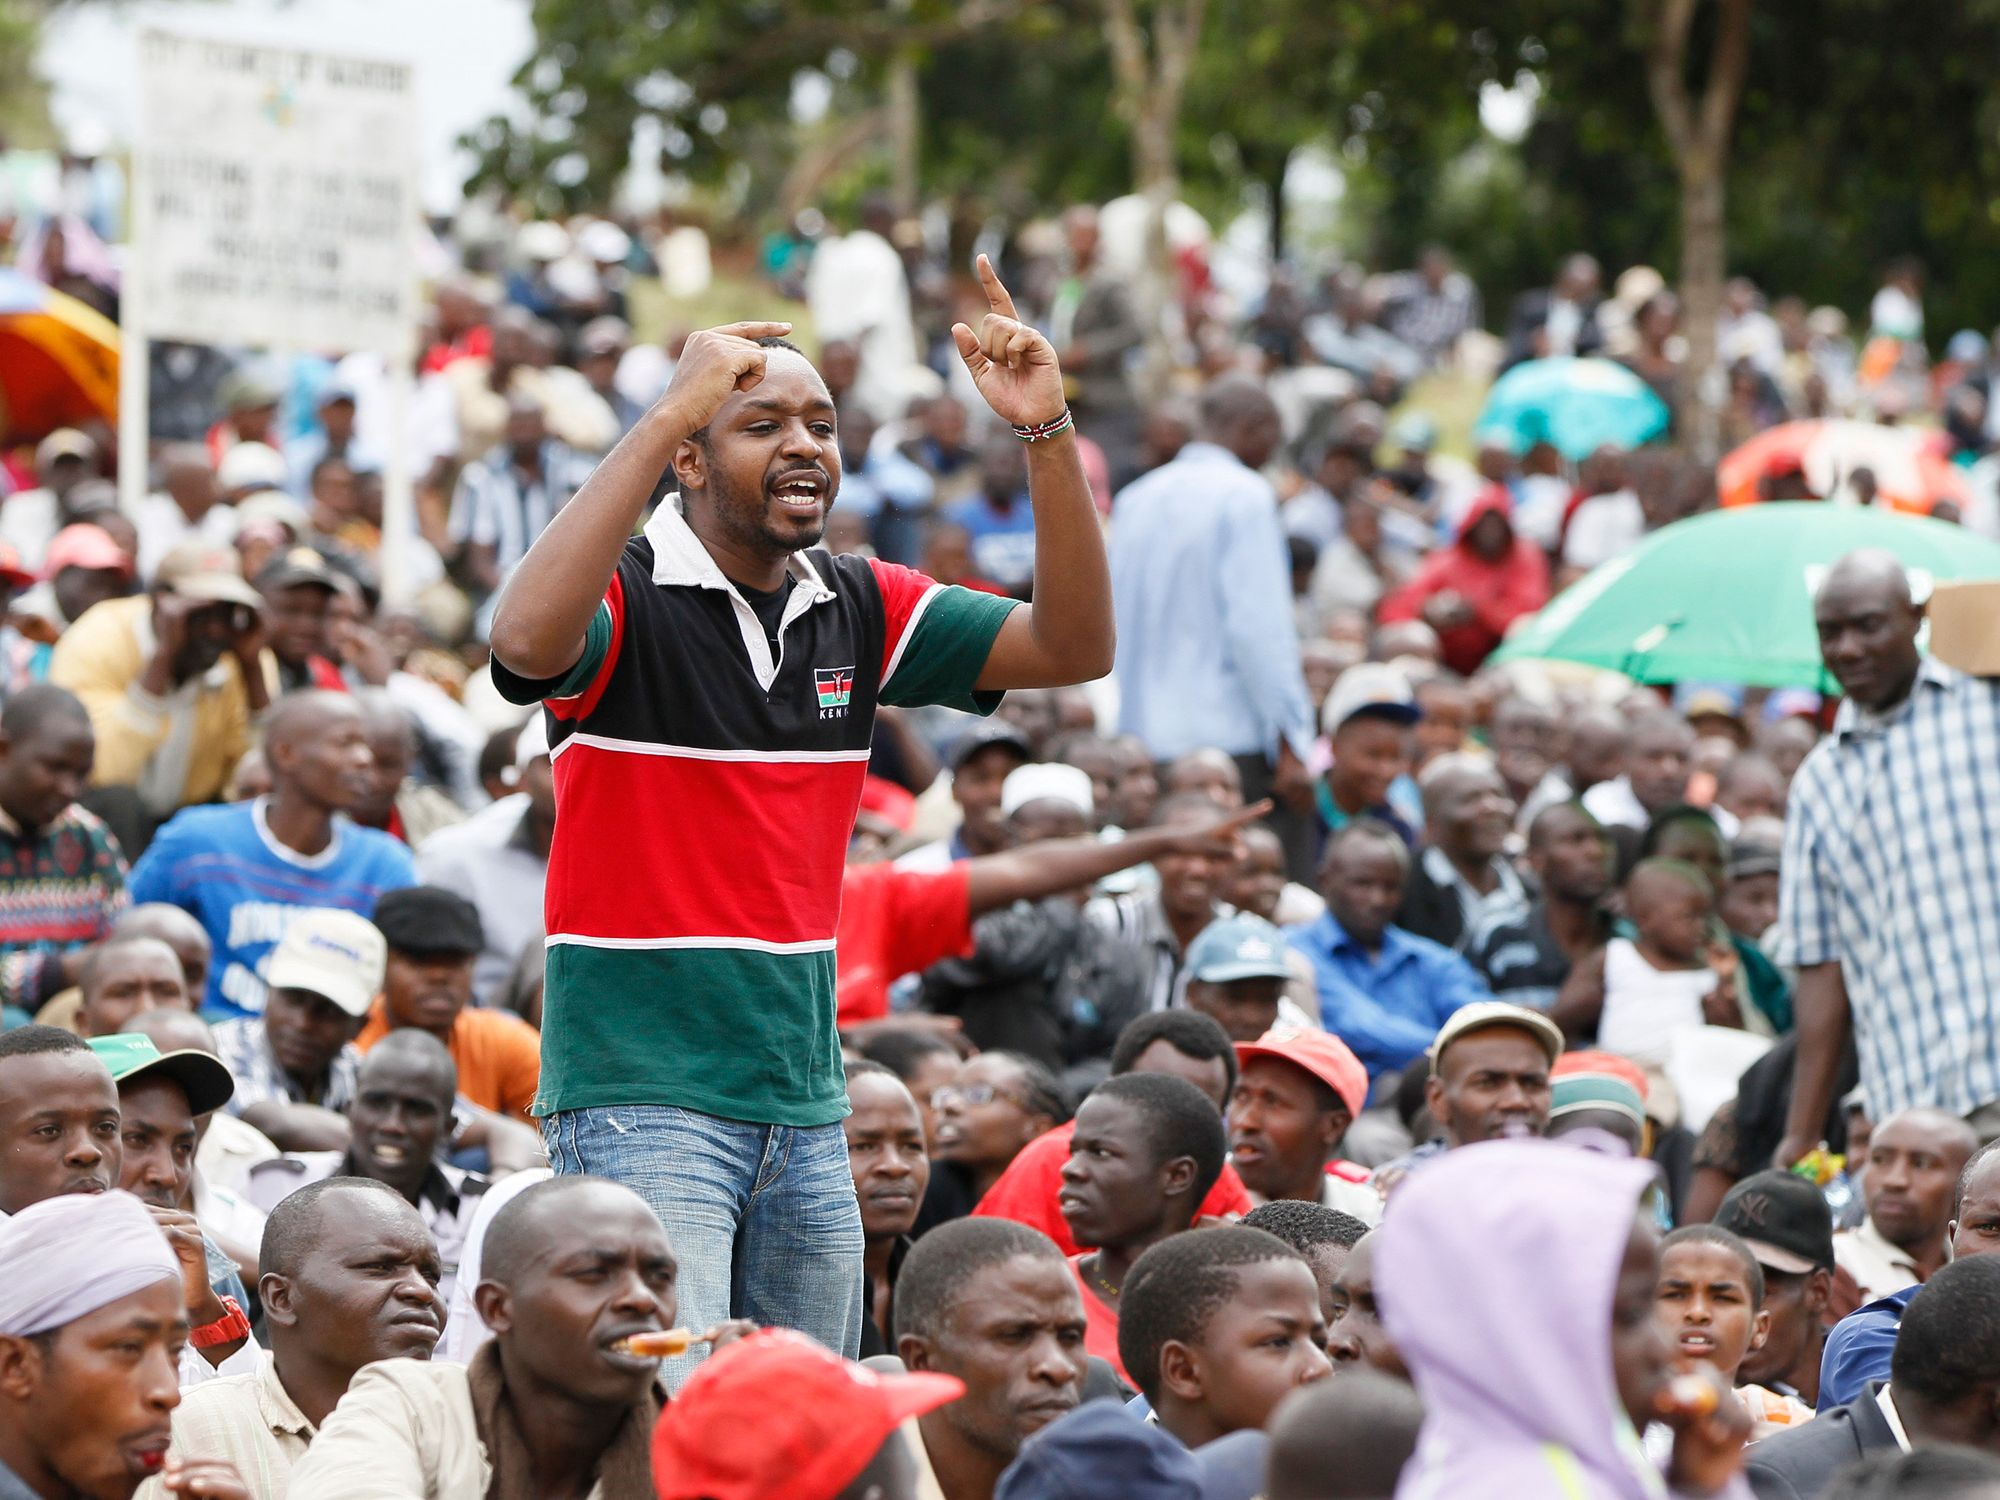 Kenyan anti-corruption protest leader Boniface Mwangi lecturing a crowd in a scene from Softie.